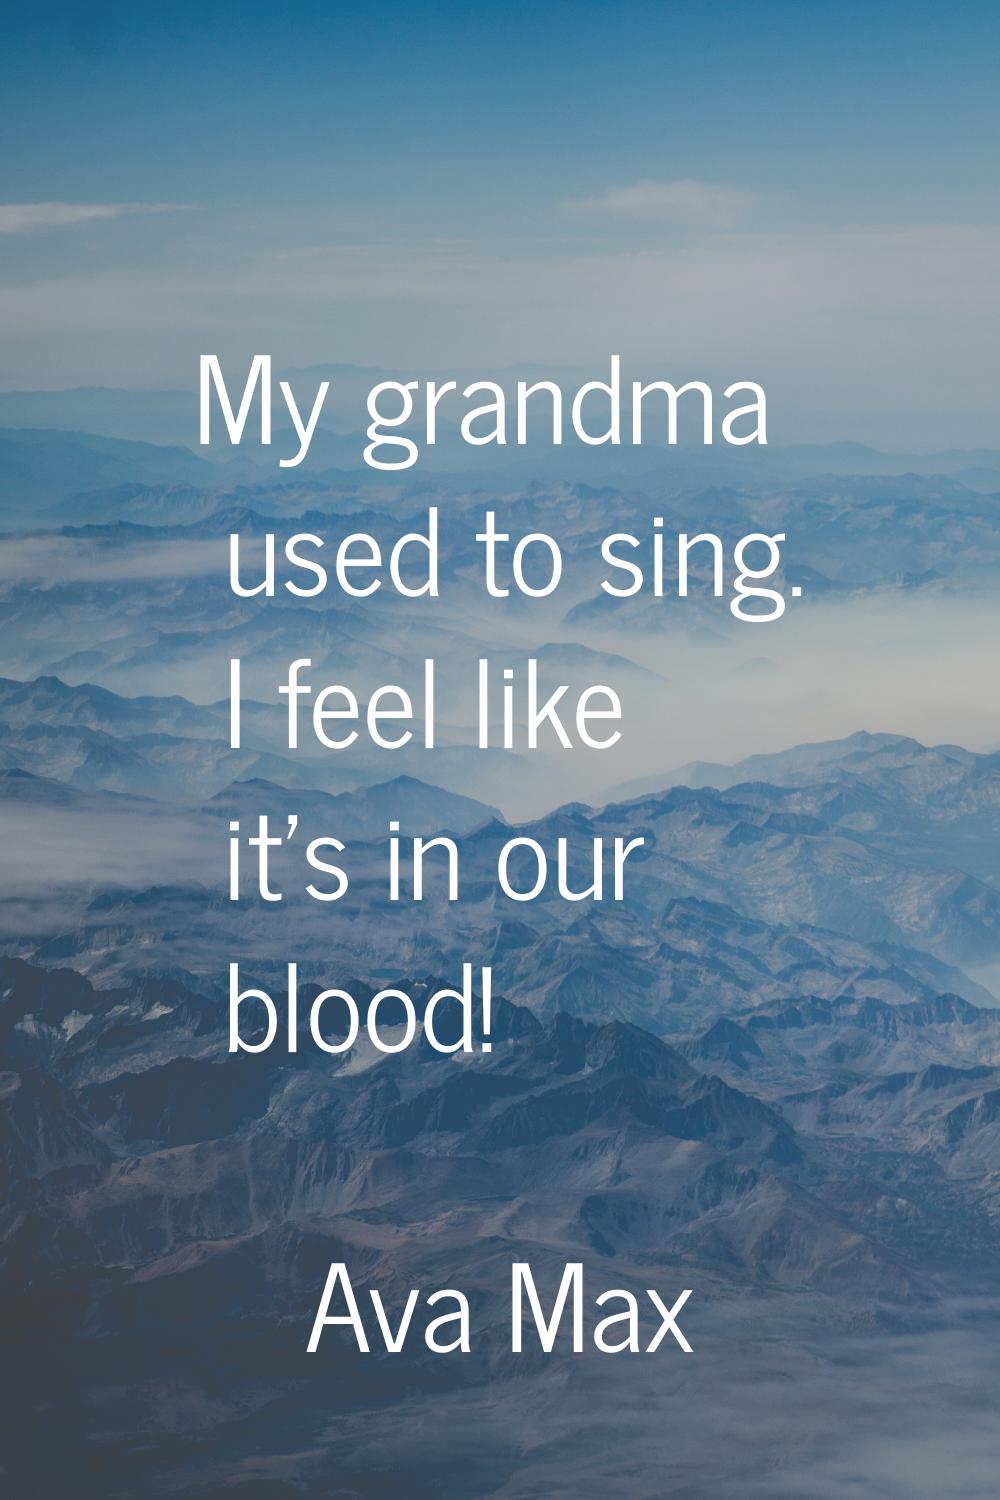 My grandma used to sing. I feel like it's in our blood!